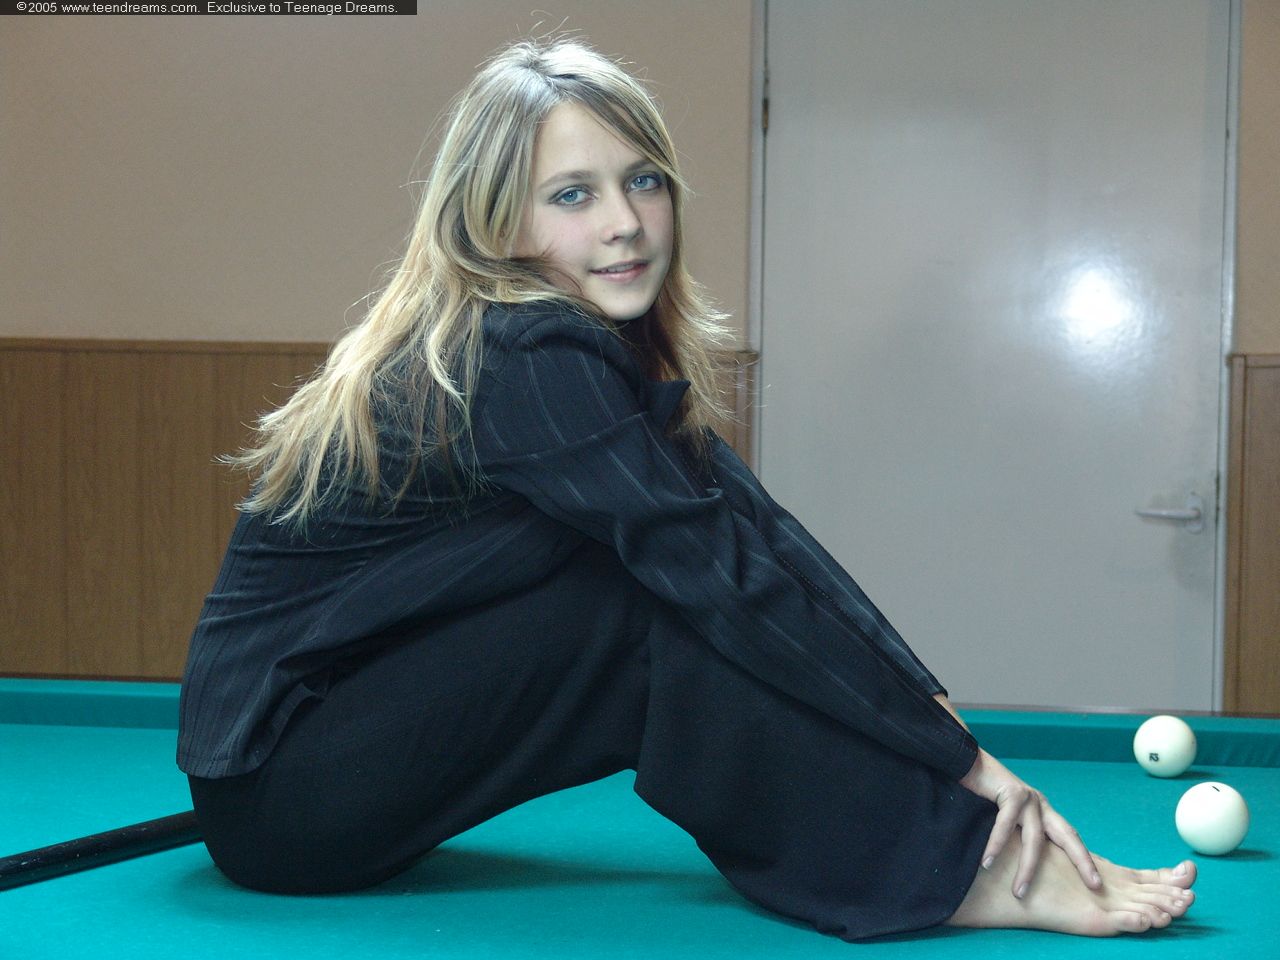 russian-babe-gets-naked-on-a-snooker-table-6